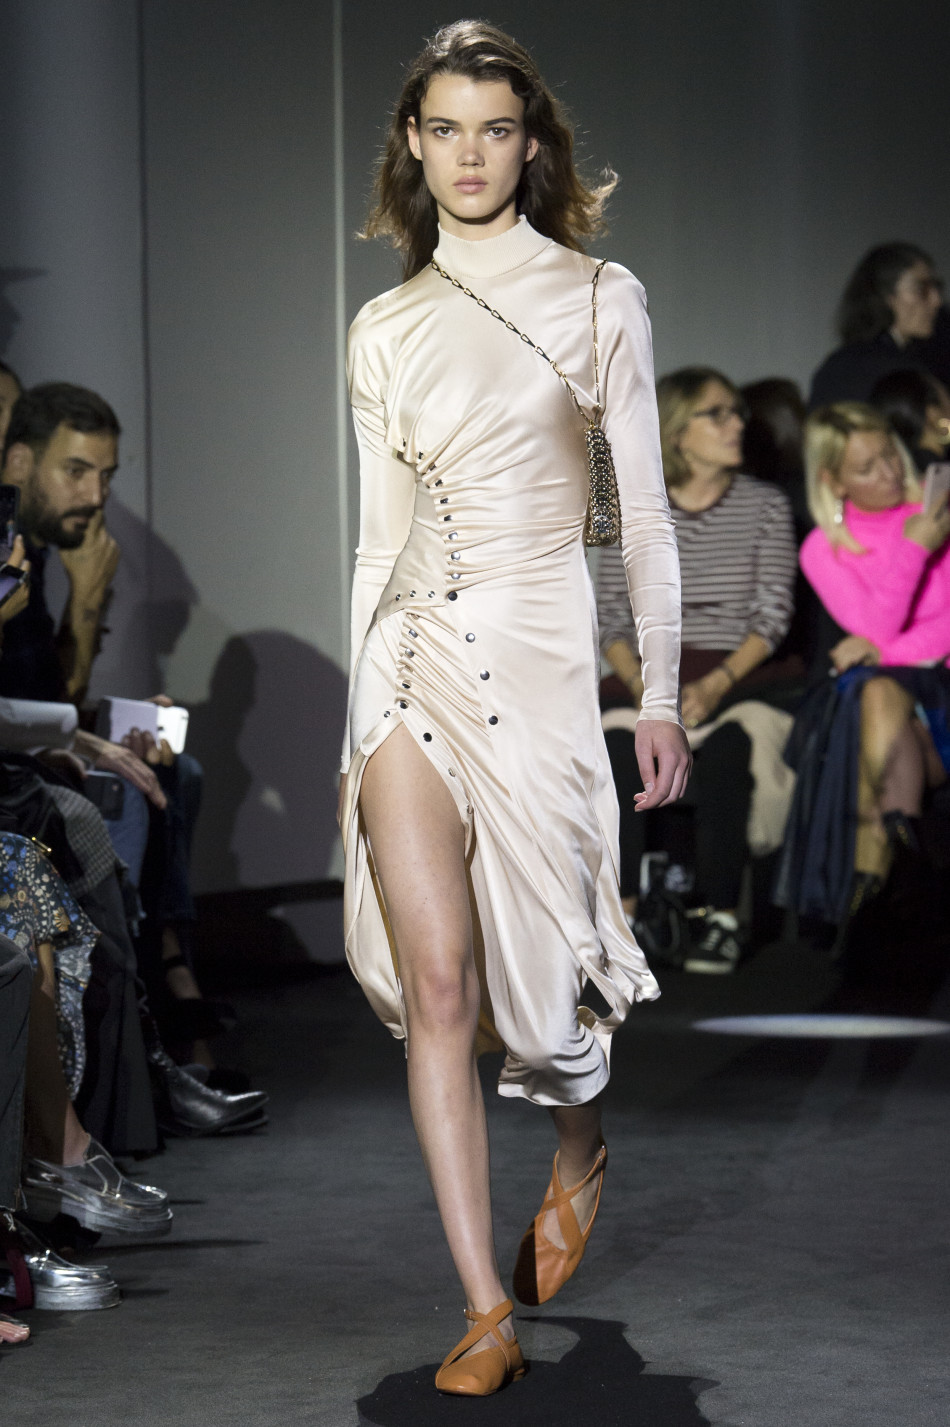 View our top 12 looks here from the Paco Rabanne | Envelope